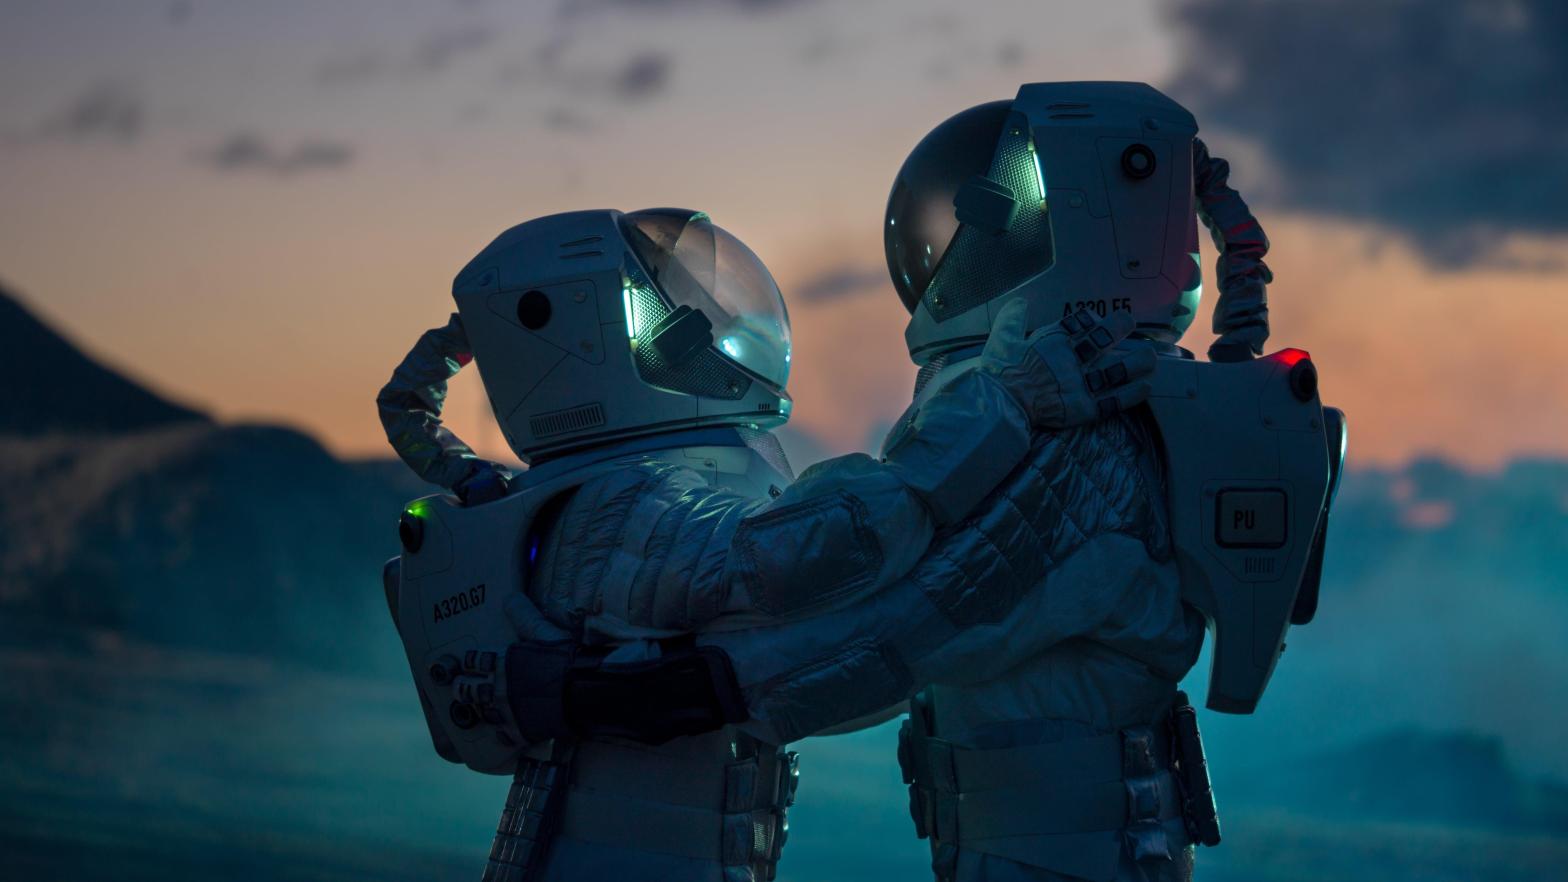 A conceptual image of two astronauts hugging on an alien planet. (Image: Gorodenkoff, Shutterstock)